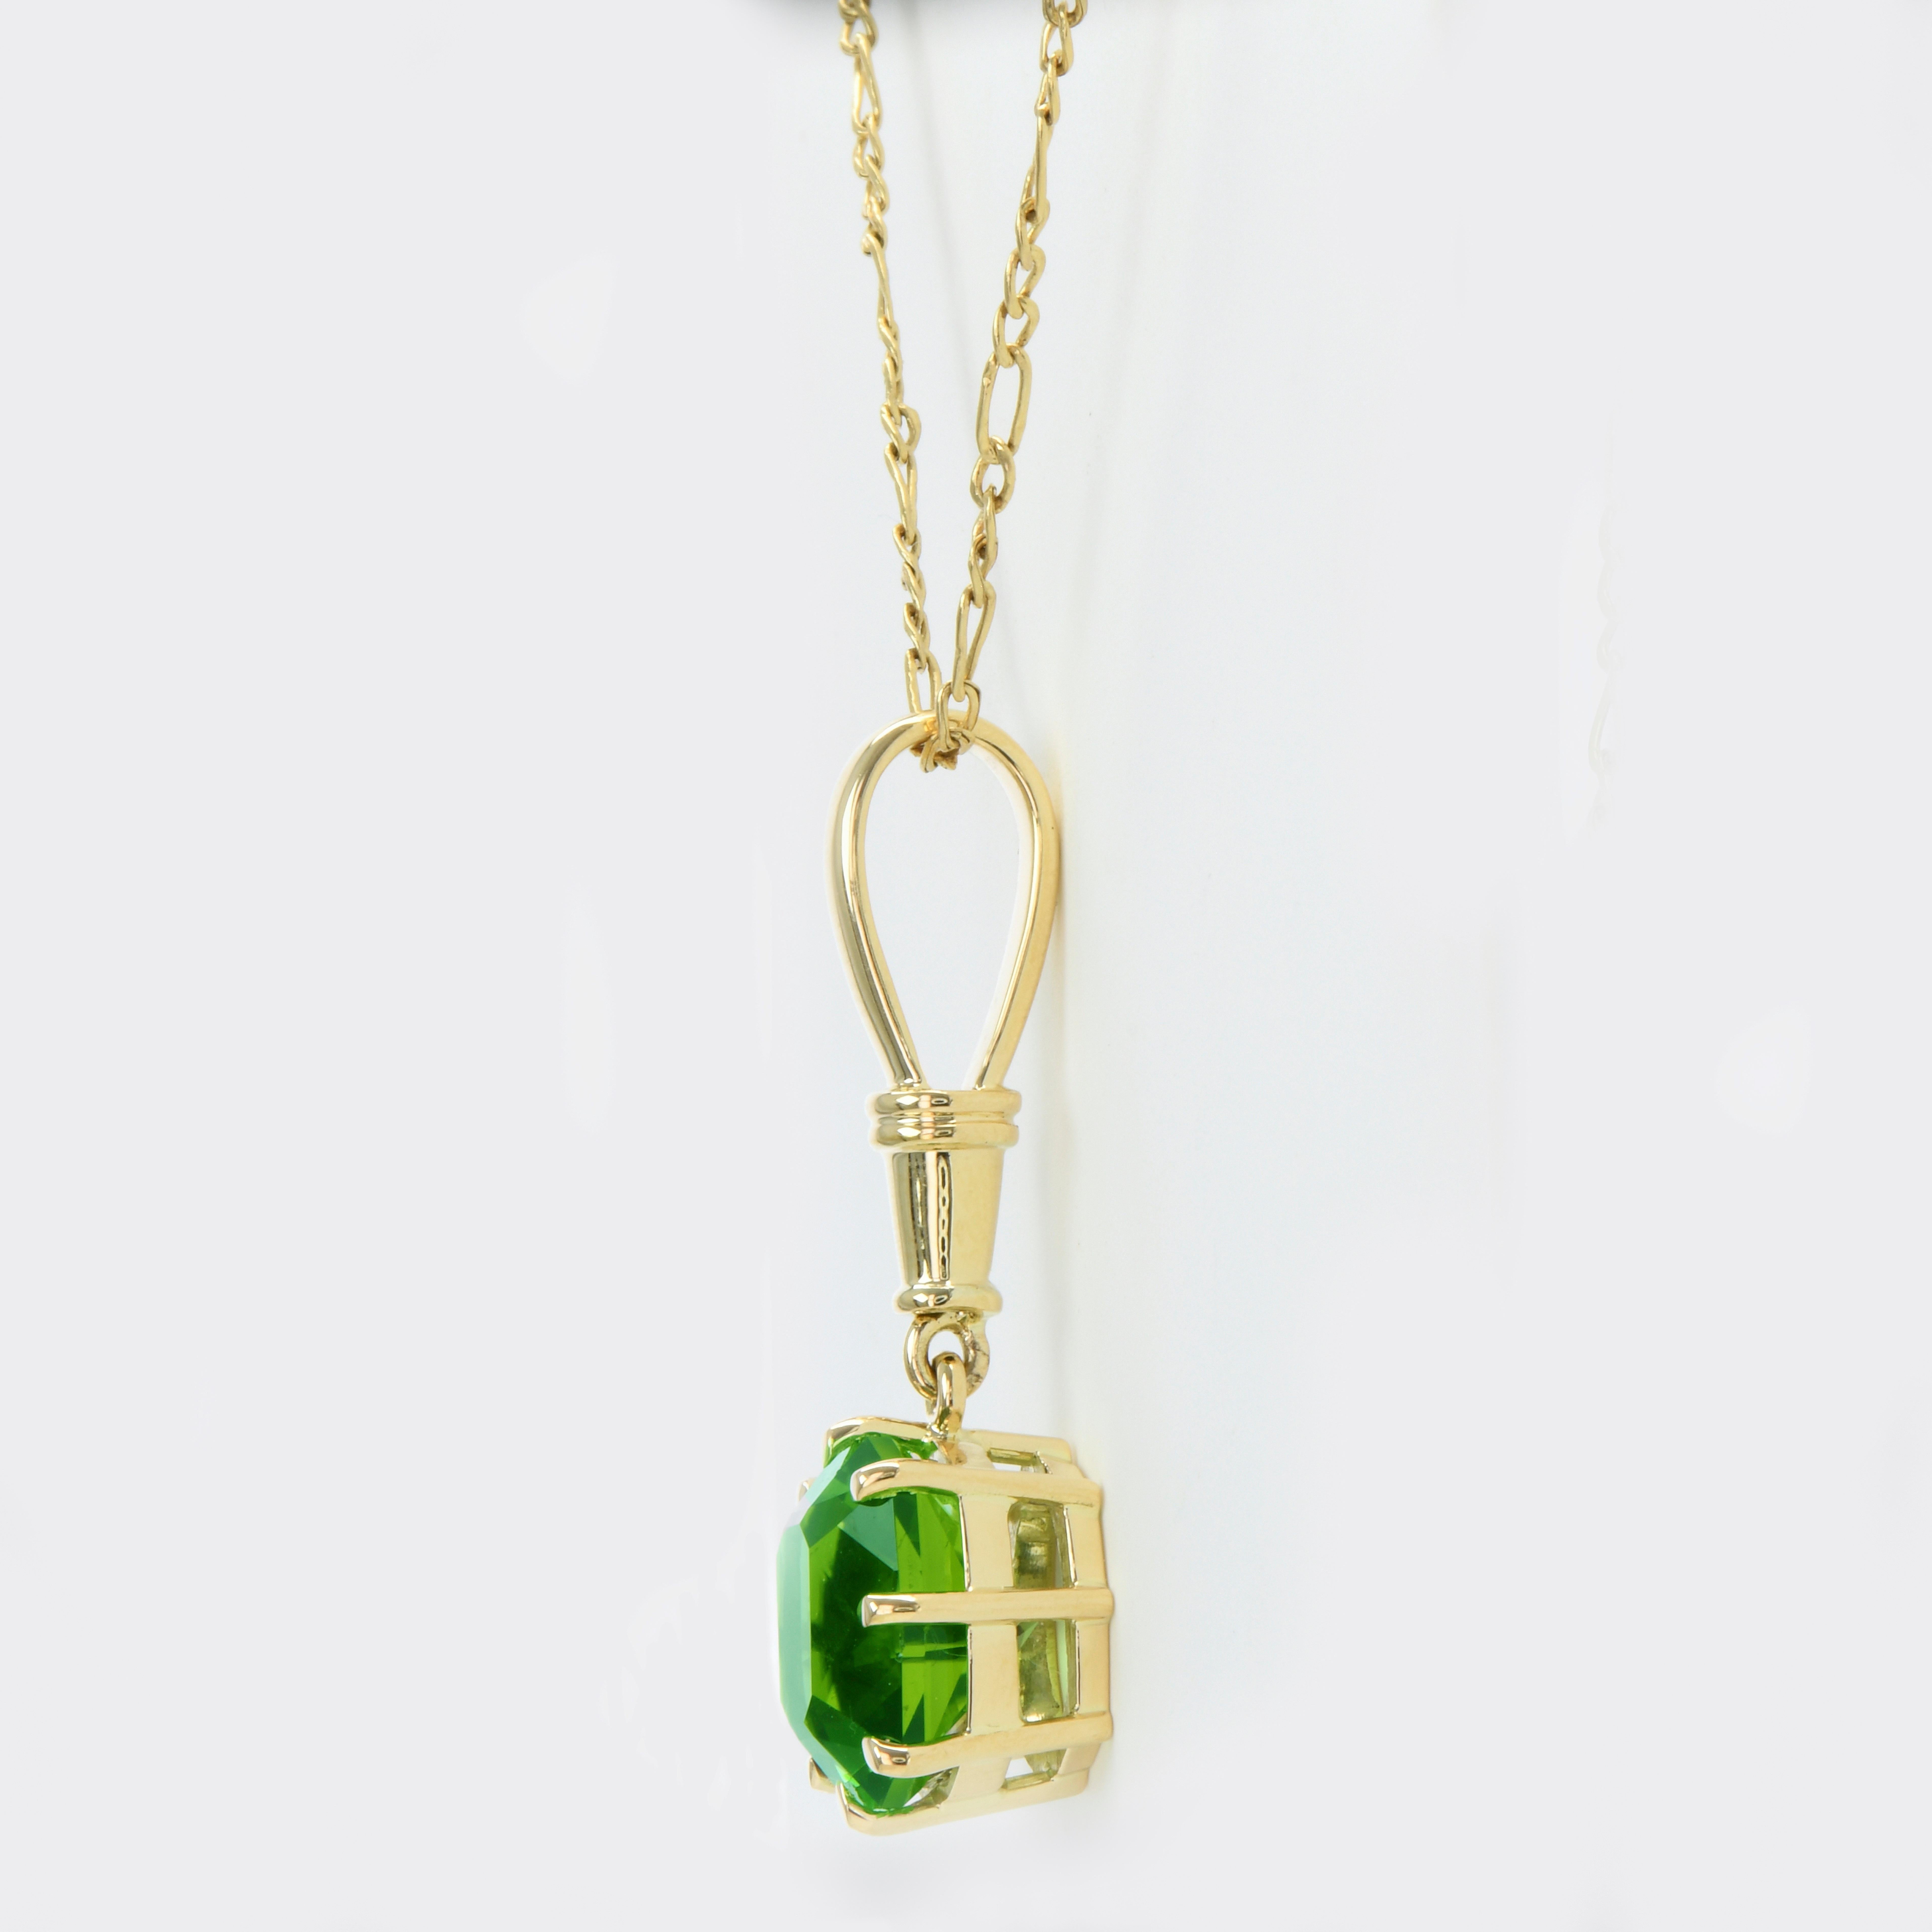 Green Tourmaline Pendant
Creator: Carson Gray Jewels
Ring Size: N/A
Metal: 18KT
Stone: Green Tourmaline
Stone Cut: Barion Mixed Step
Weight: 6.64
Style: Pendant
Place of Origin: Congo 
Period: Modern
Date of Manufacture (circa): November 2023